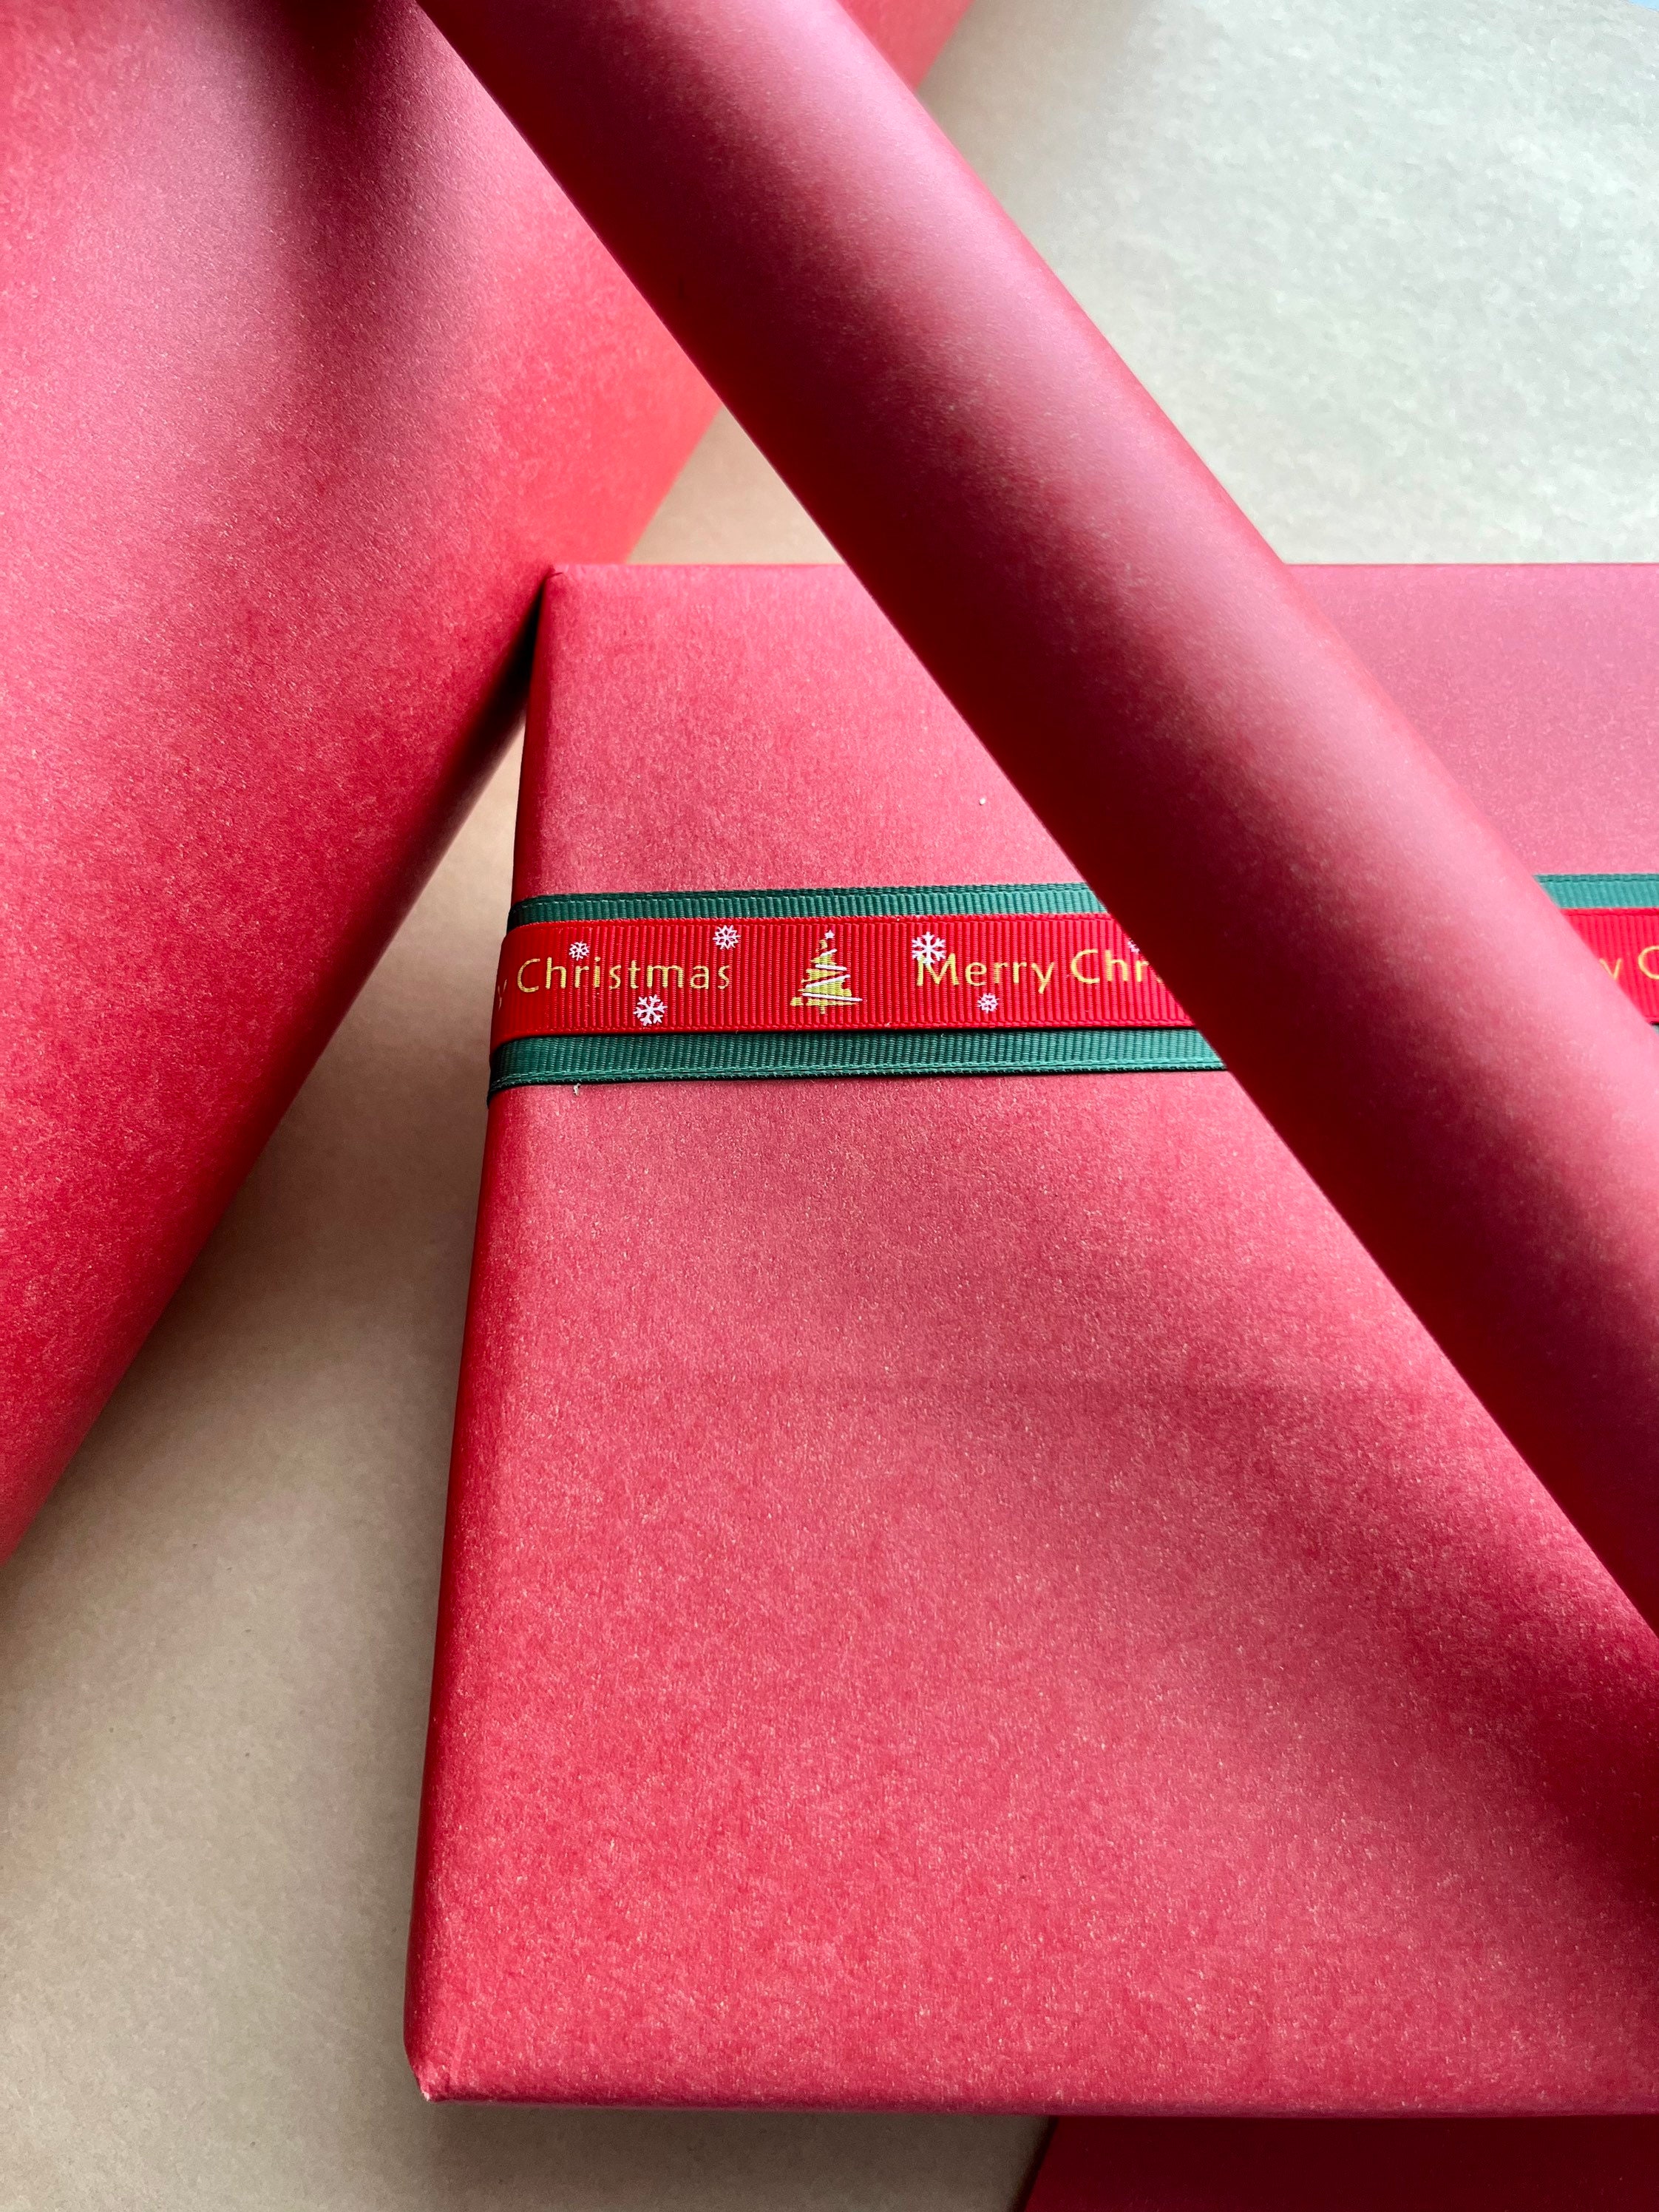 Matt Red Kraft Wrapping Paper, Sustainable Eco Friendly Kraft Paper, 100%  Recycled & Recyclable, Luxury Sustainable Birthday Gift Wrap 